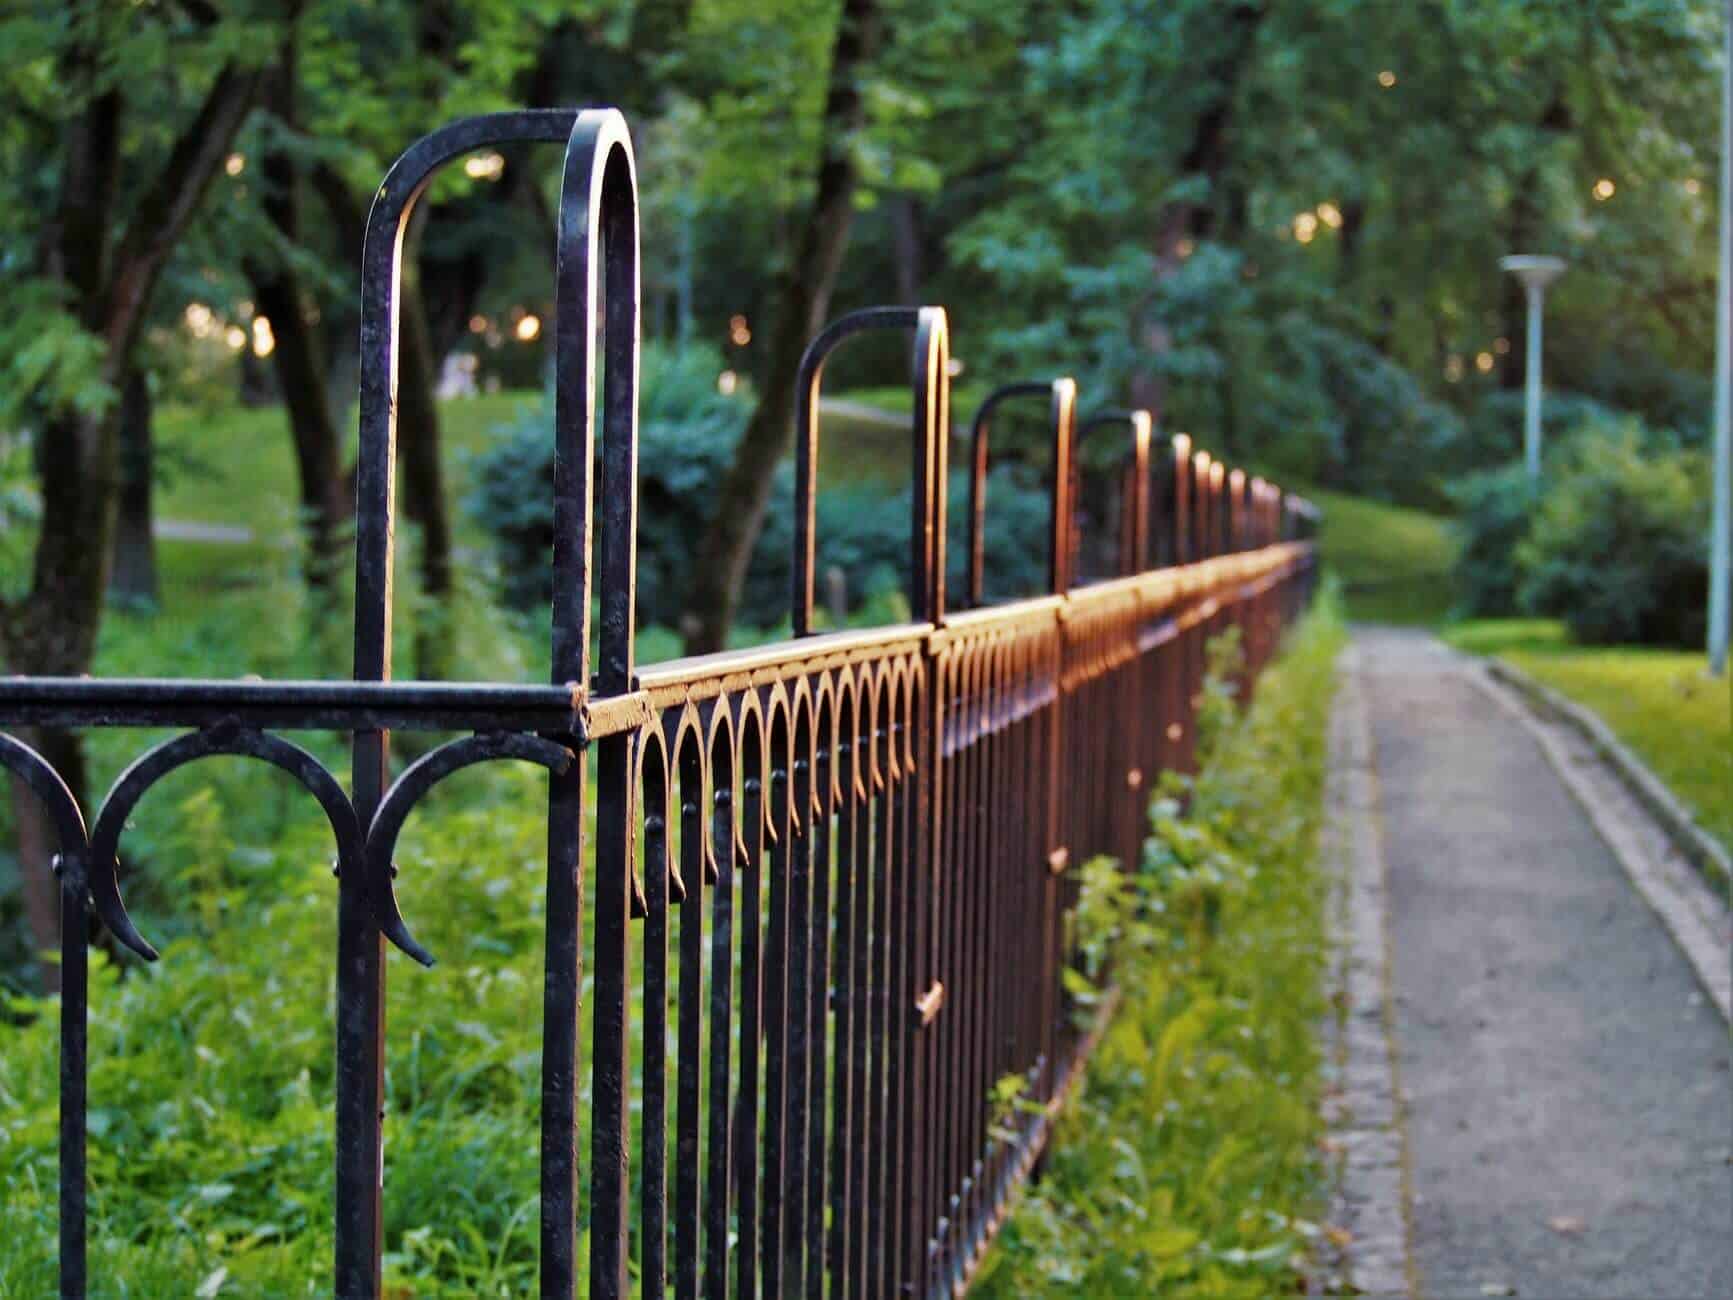 Metal gate in a park surrounded by trees